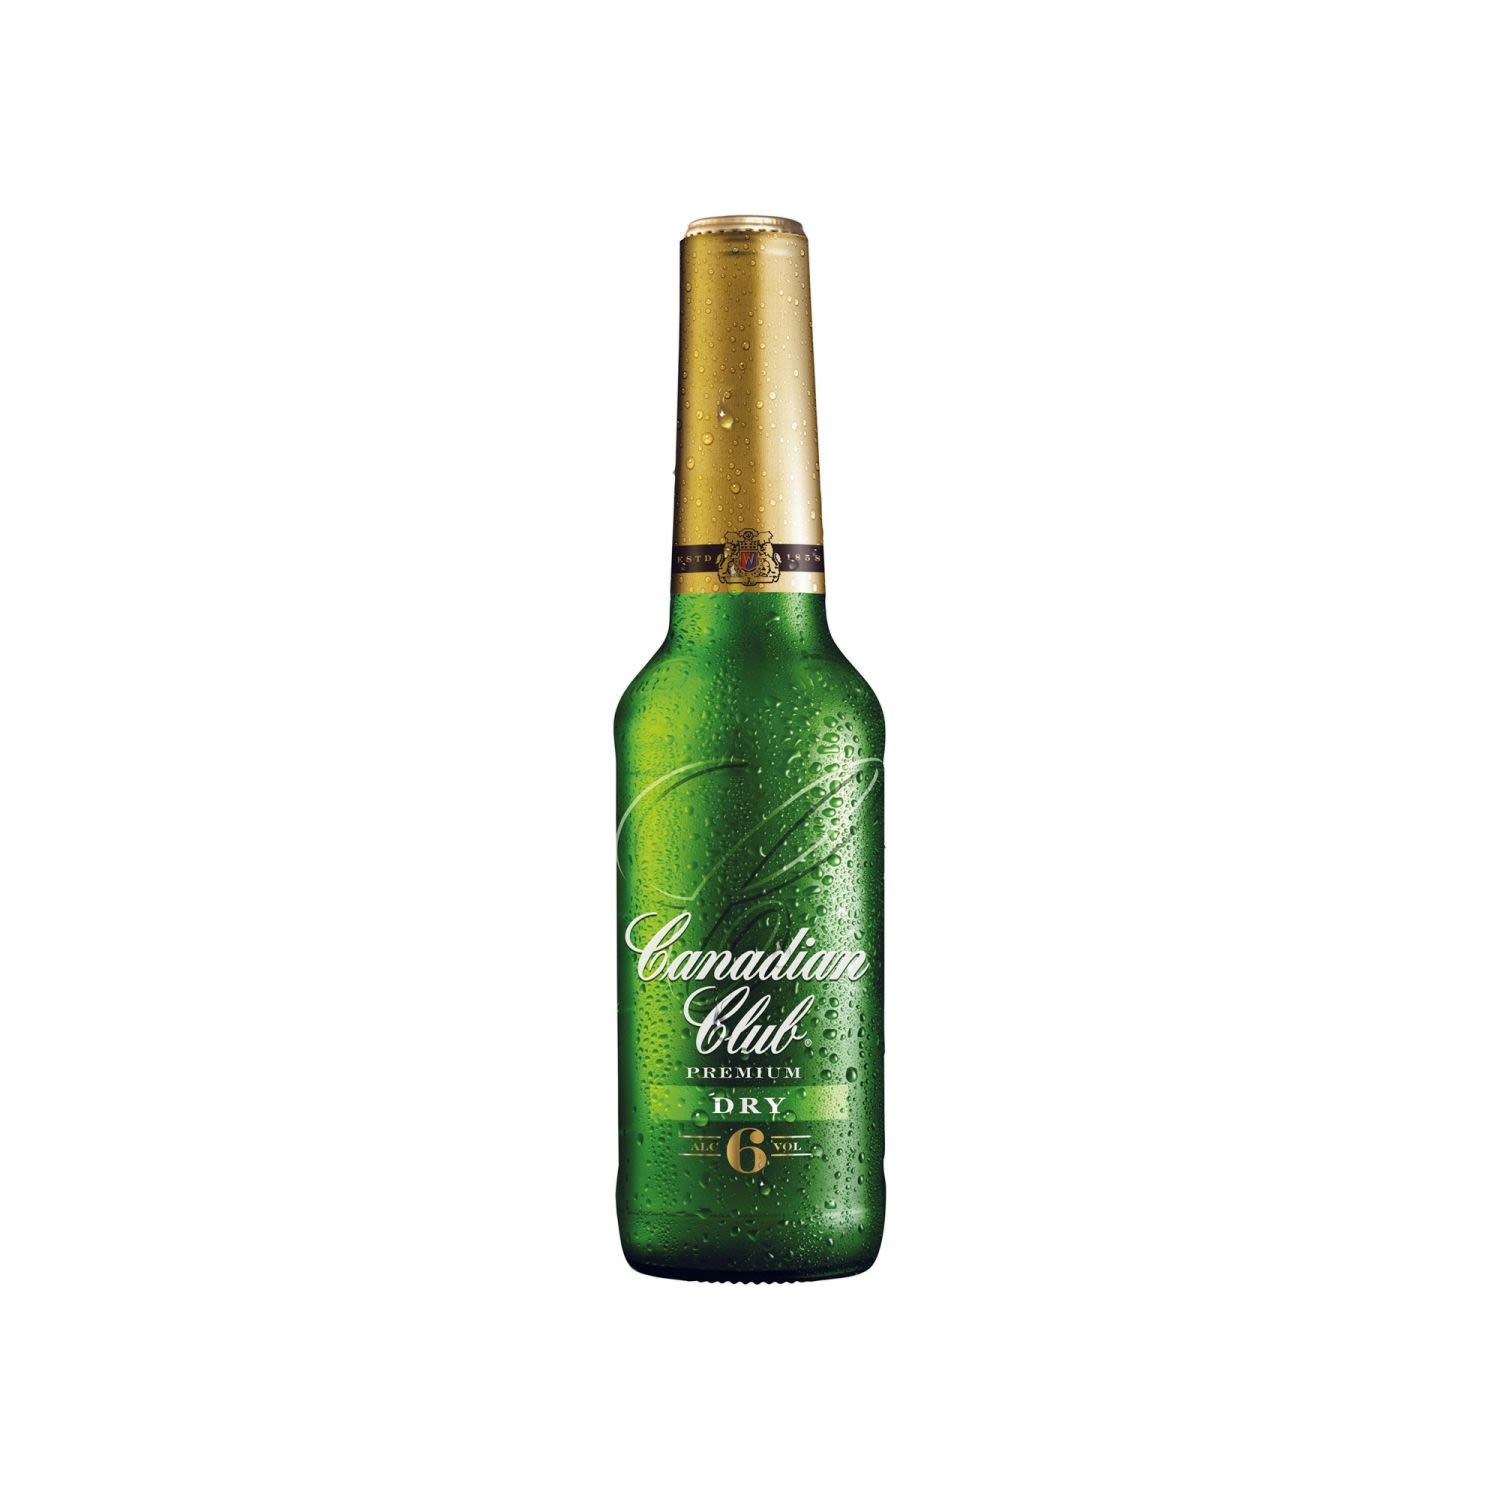 Canadian Club Premium Whisky and Dry Bottle 330mL